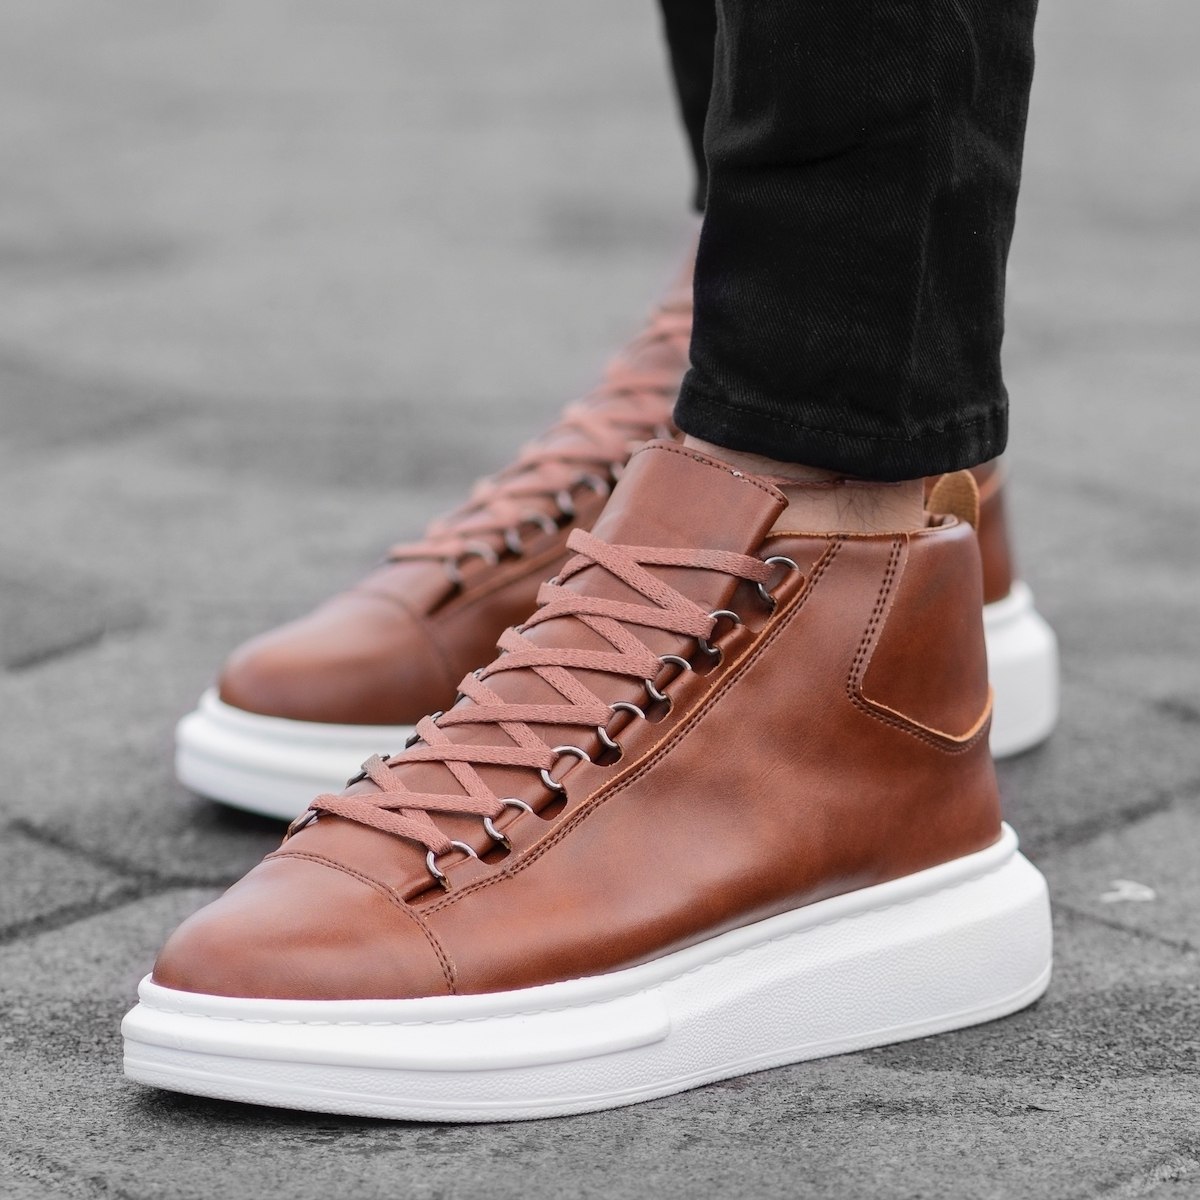 YUHAOTIN Slip on Sneakers Men Wide Width Extra Cushion New Men's Casual  Shoes Korean Trend Sports High Top Leather Shoes Handmade Large Size Ankle  Boots 